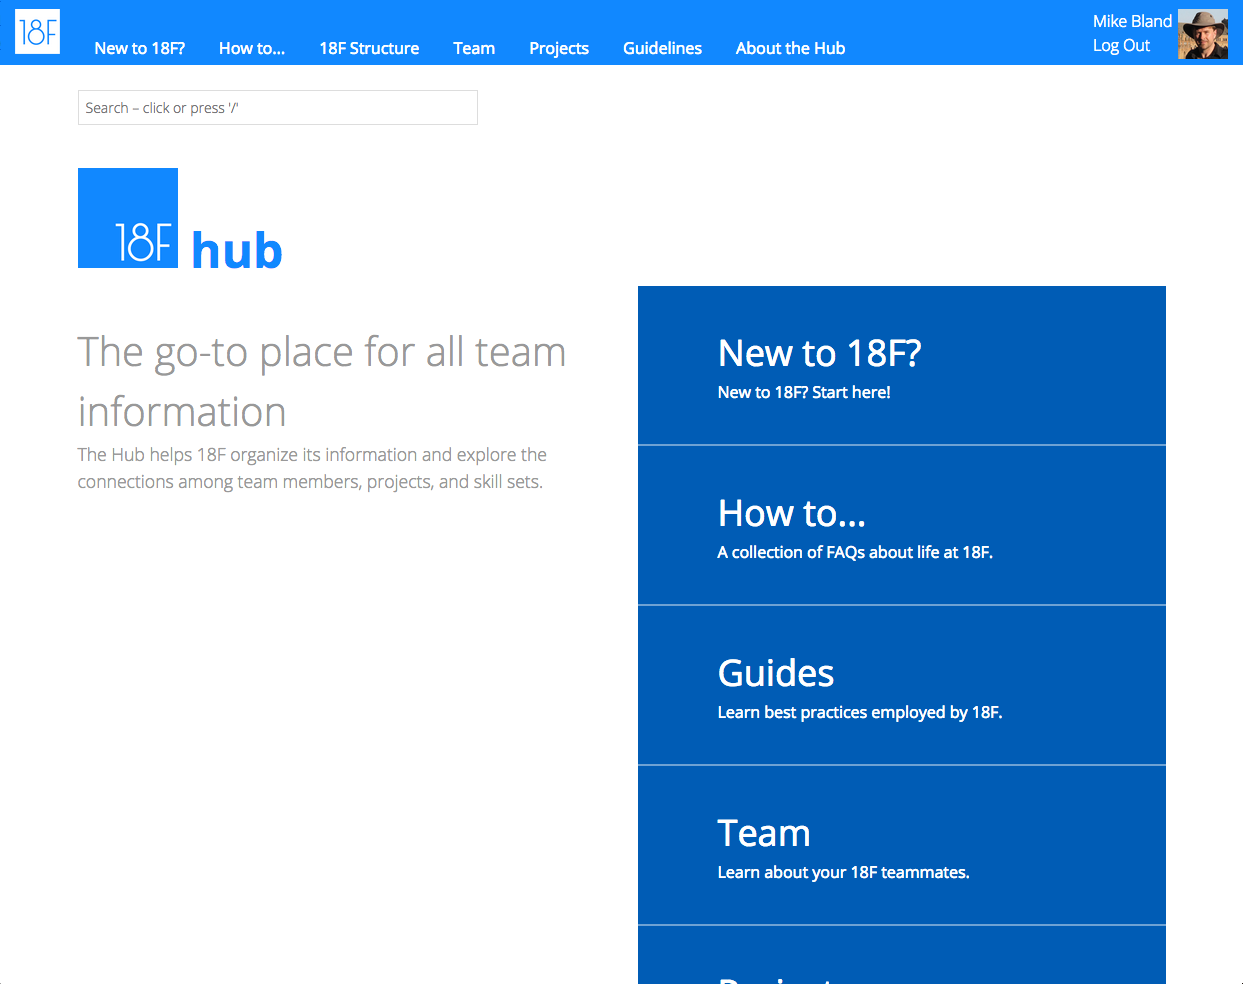 The front page of The Hub